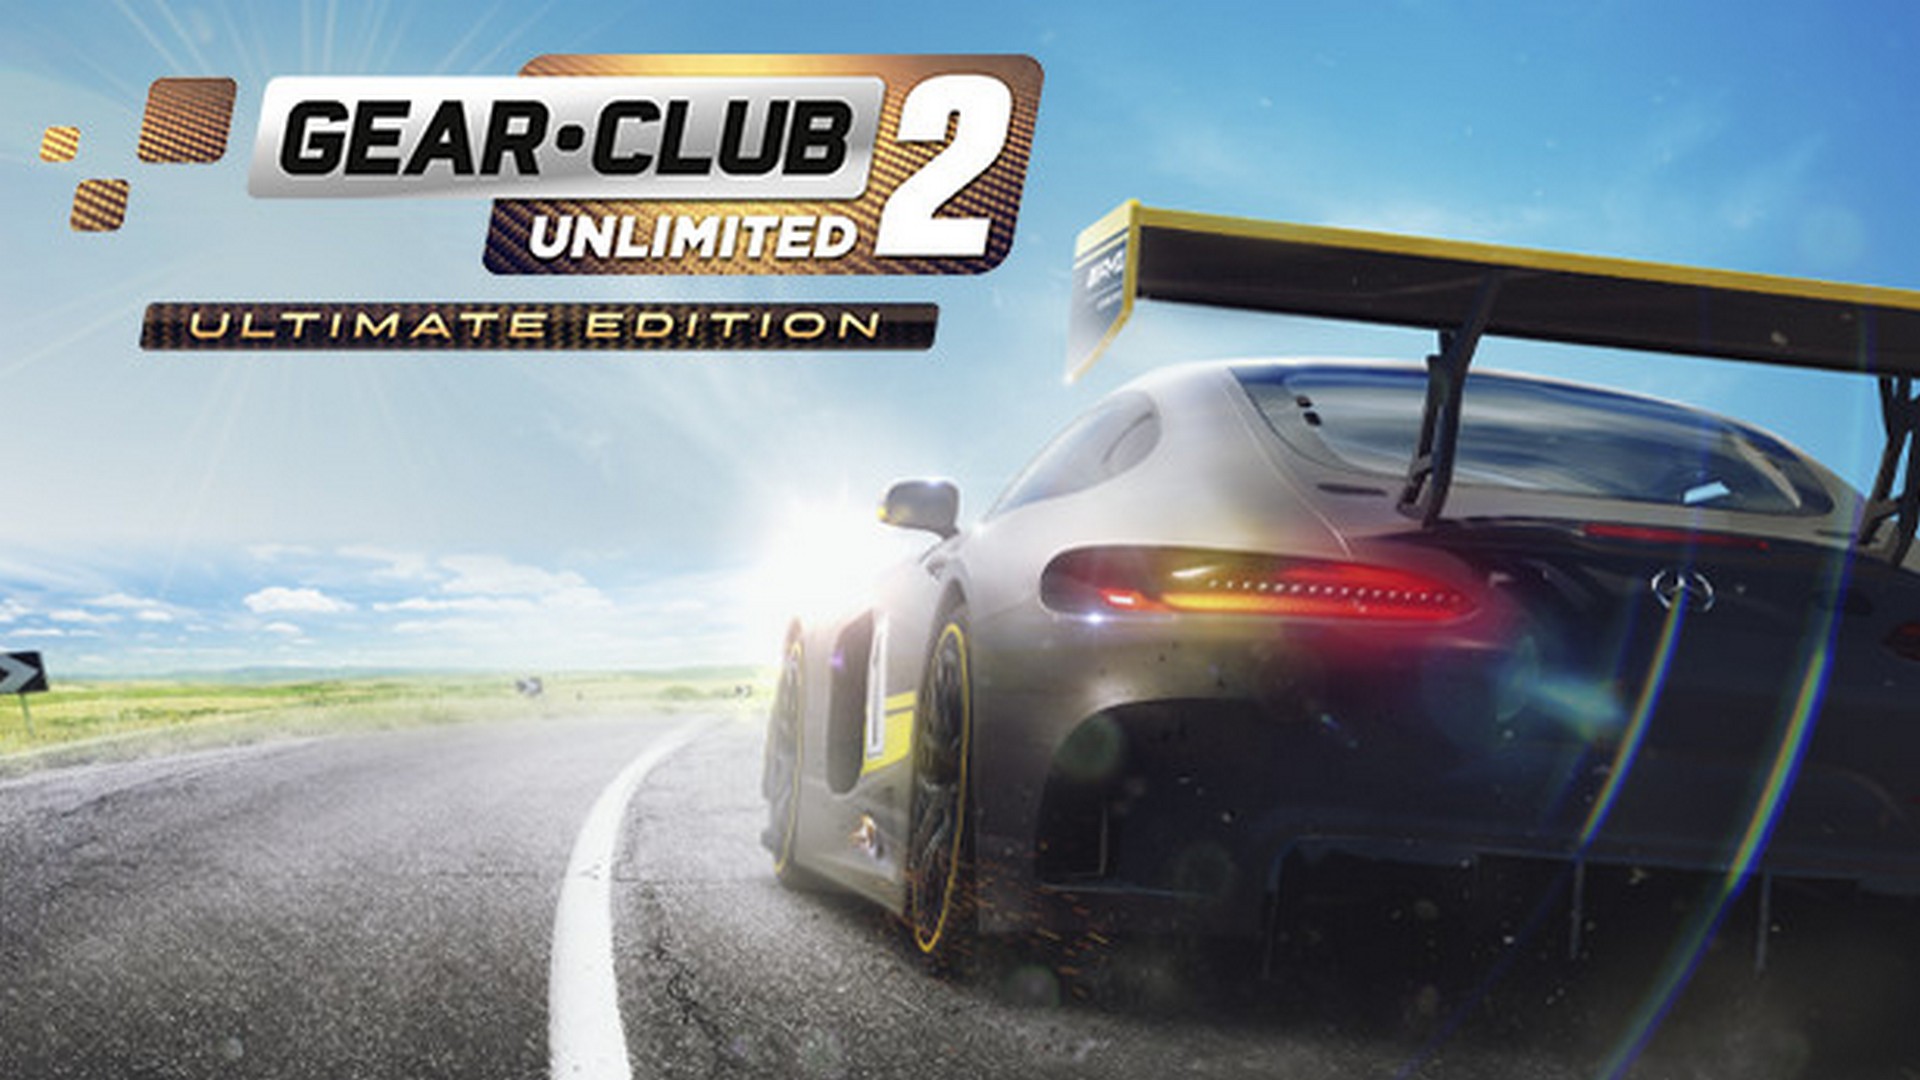 Gear.Club Unlimited 2 – Ultimate Edition Is Now Available